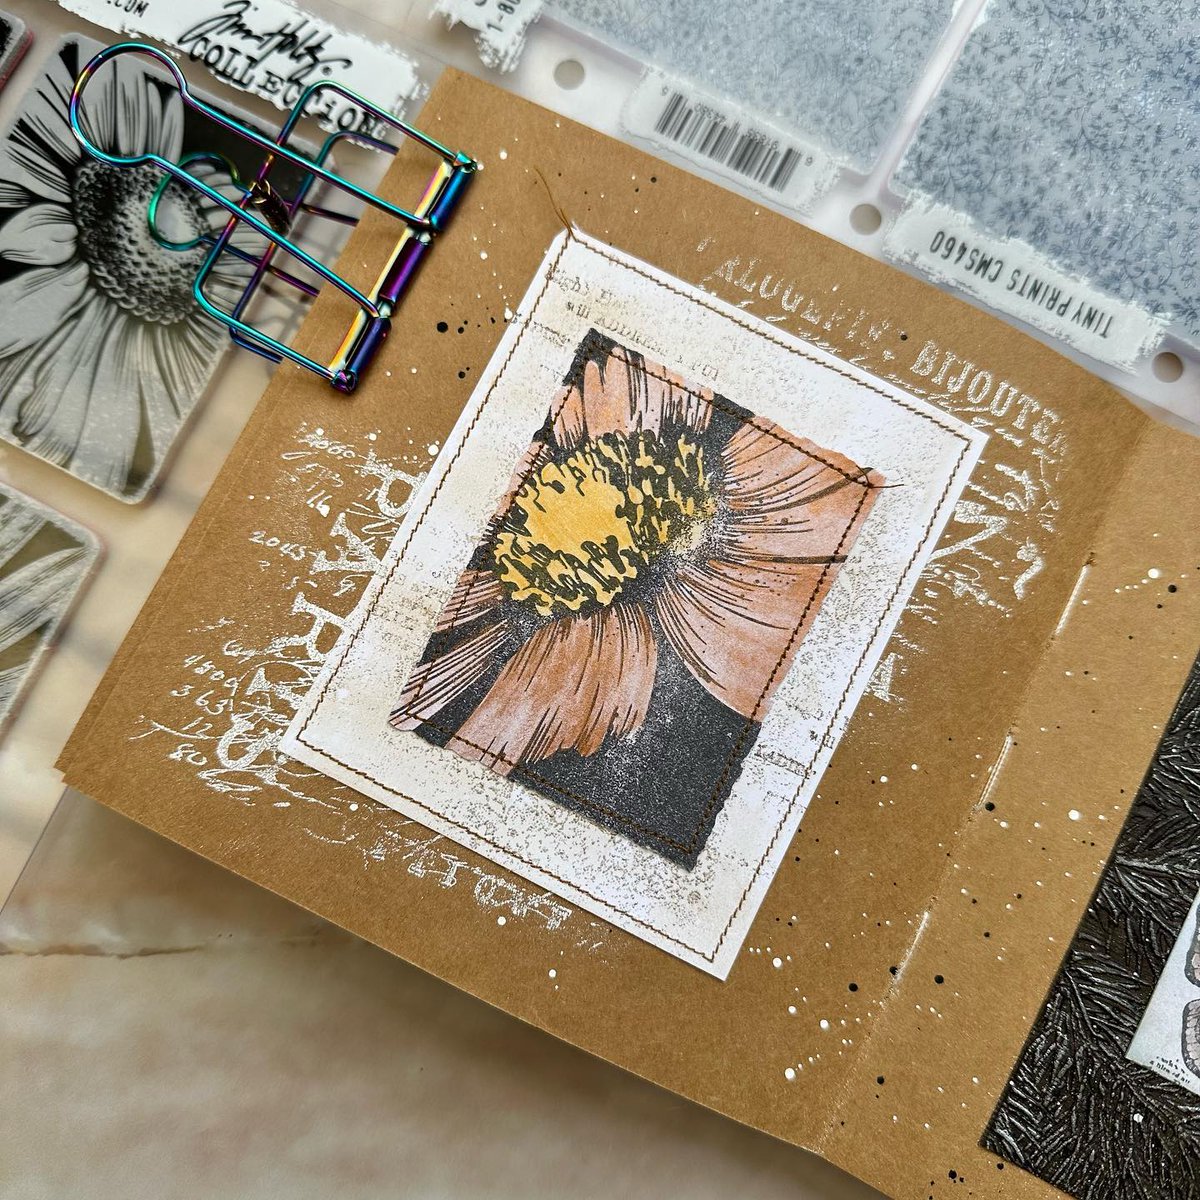 🌸 Kraft journal + NEW #timholtzstamps Bold Botanicals ✨

✂️ #handmade by @victoriawildingcreates

 #timholtz #artjournal #kraftjournal #stamping #embossing #mixedmediajournal #paperstitching #crafts #DIY #mixedmedia #onlineshopping #stampersanonymous